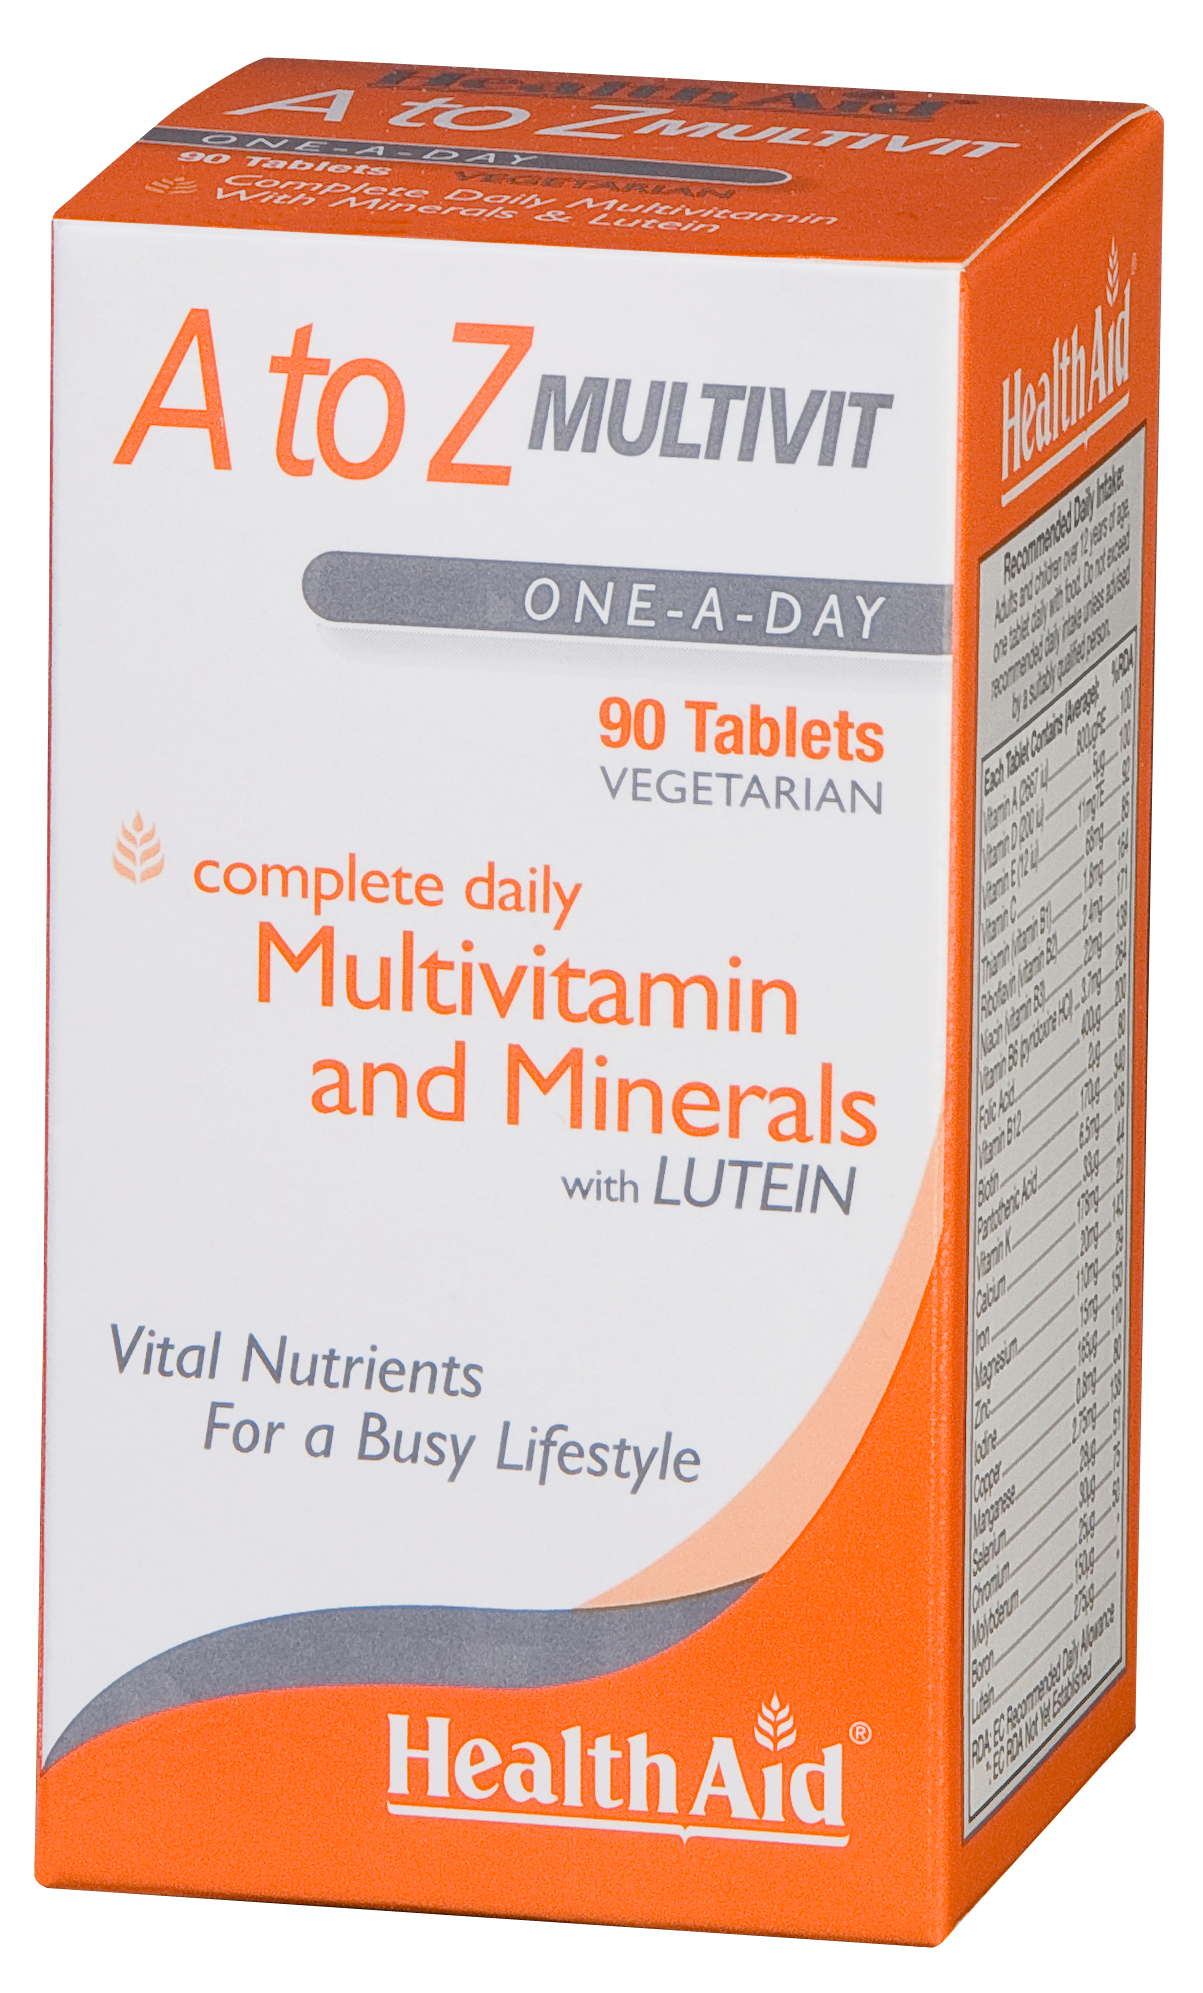 Health-Aid A To Z Multivit Tablets 90 S